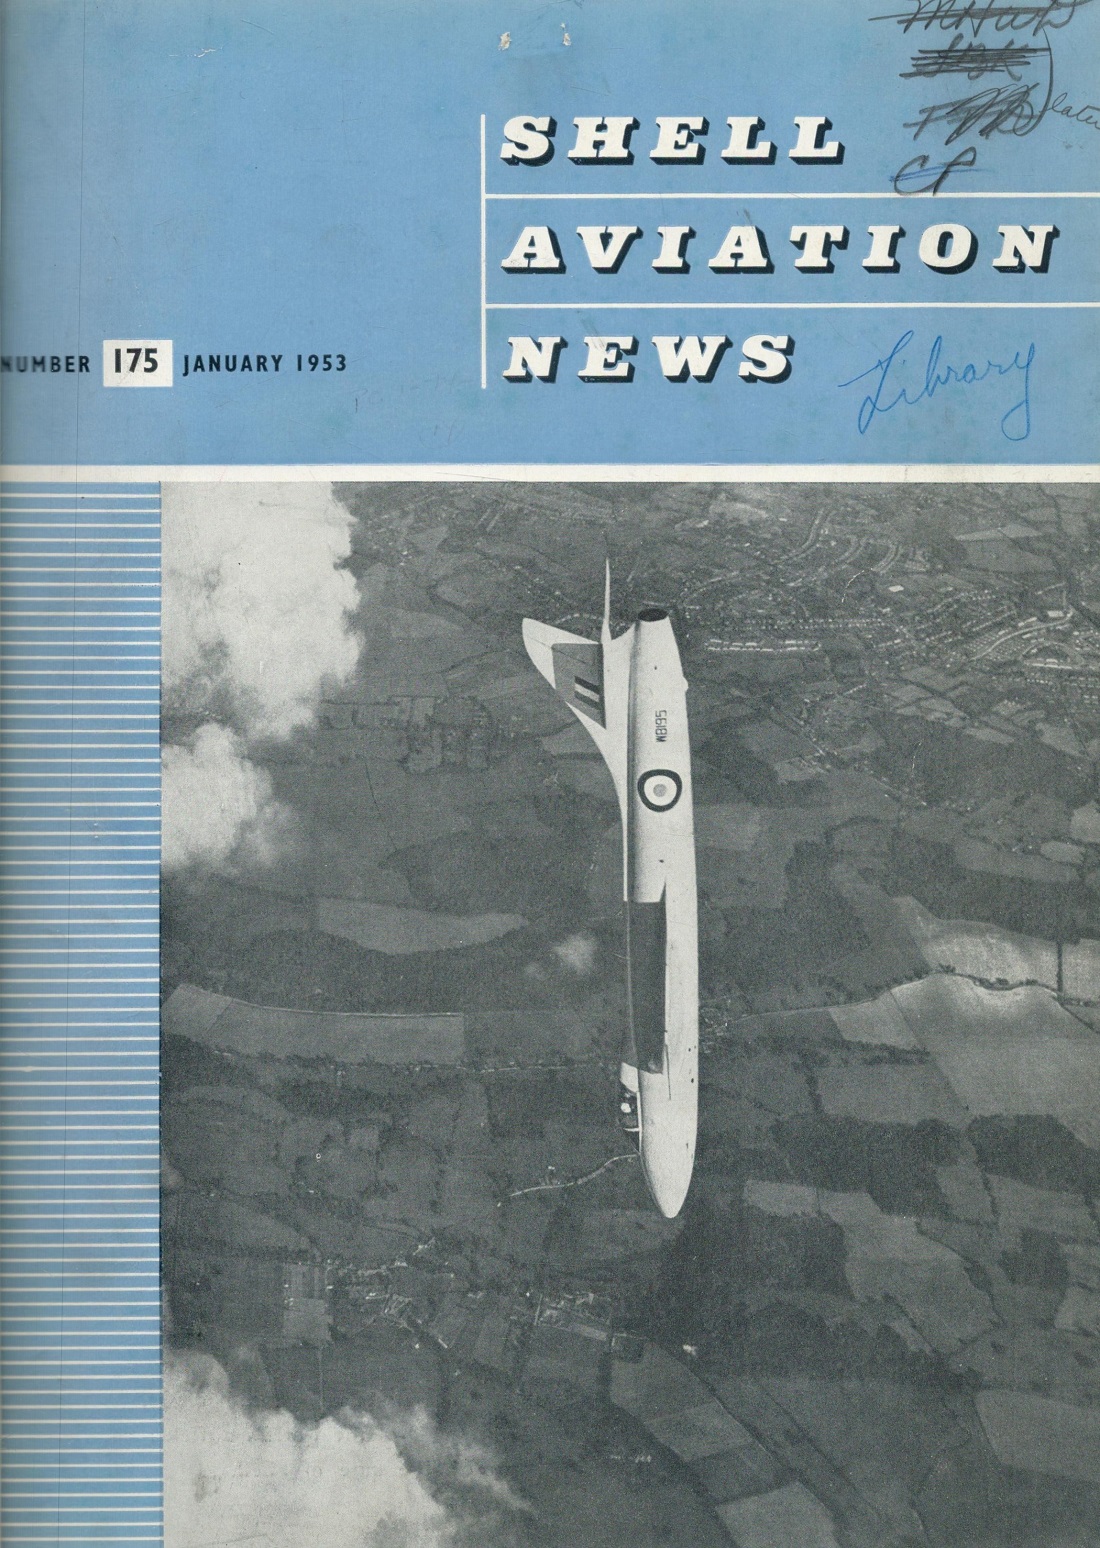 Shell Aviation News Jan 1951 to Dec 1952 and Jan to Dec 1953 unsigned Hardbacked Books Published - Image 2 of 4